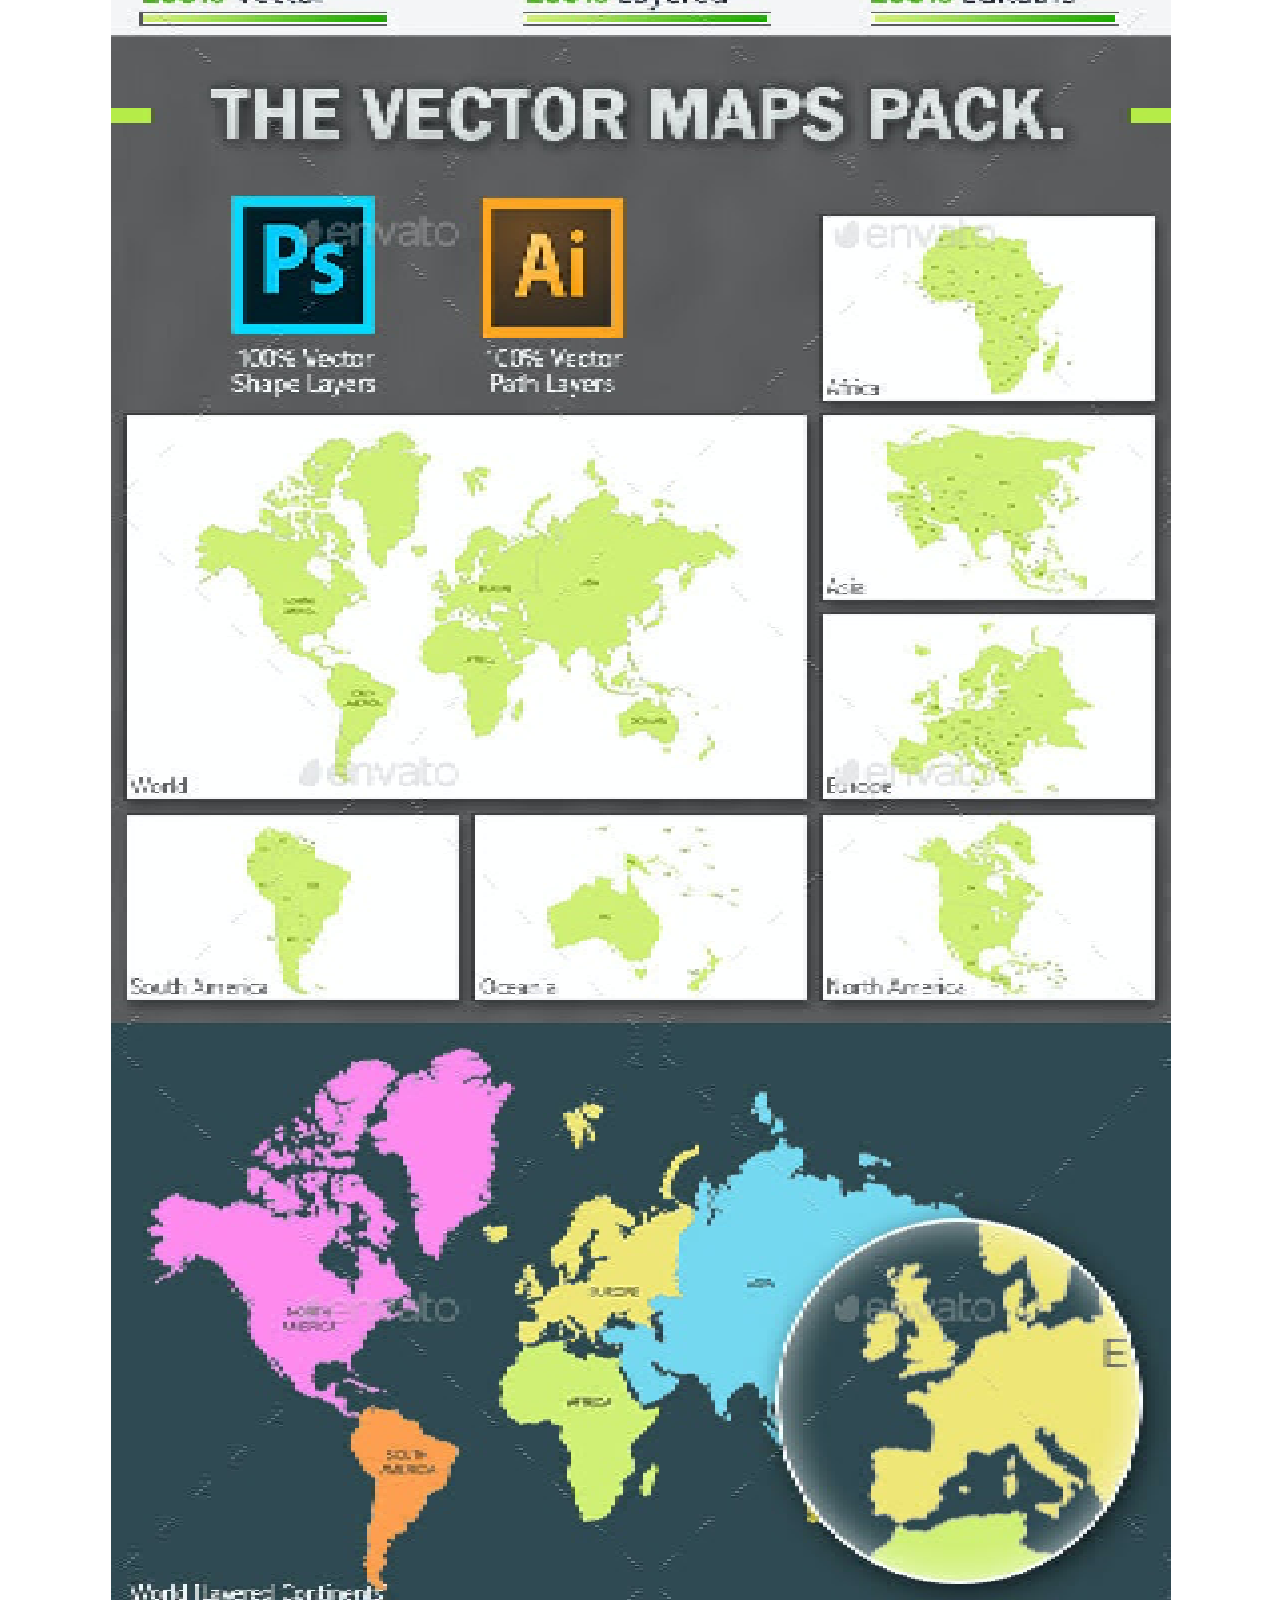 The vector maps pack pinterest image.